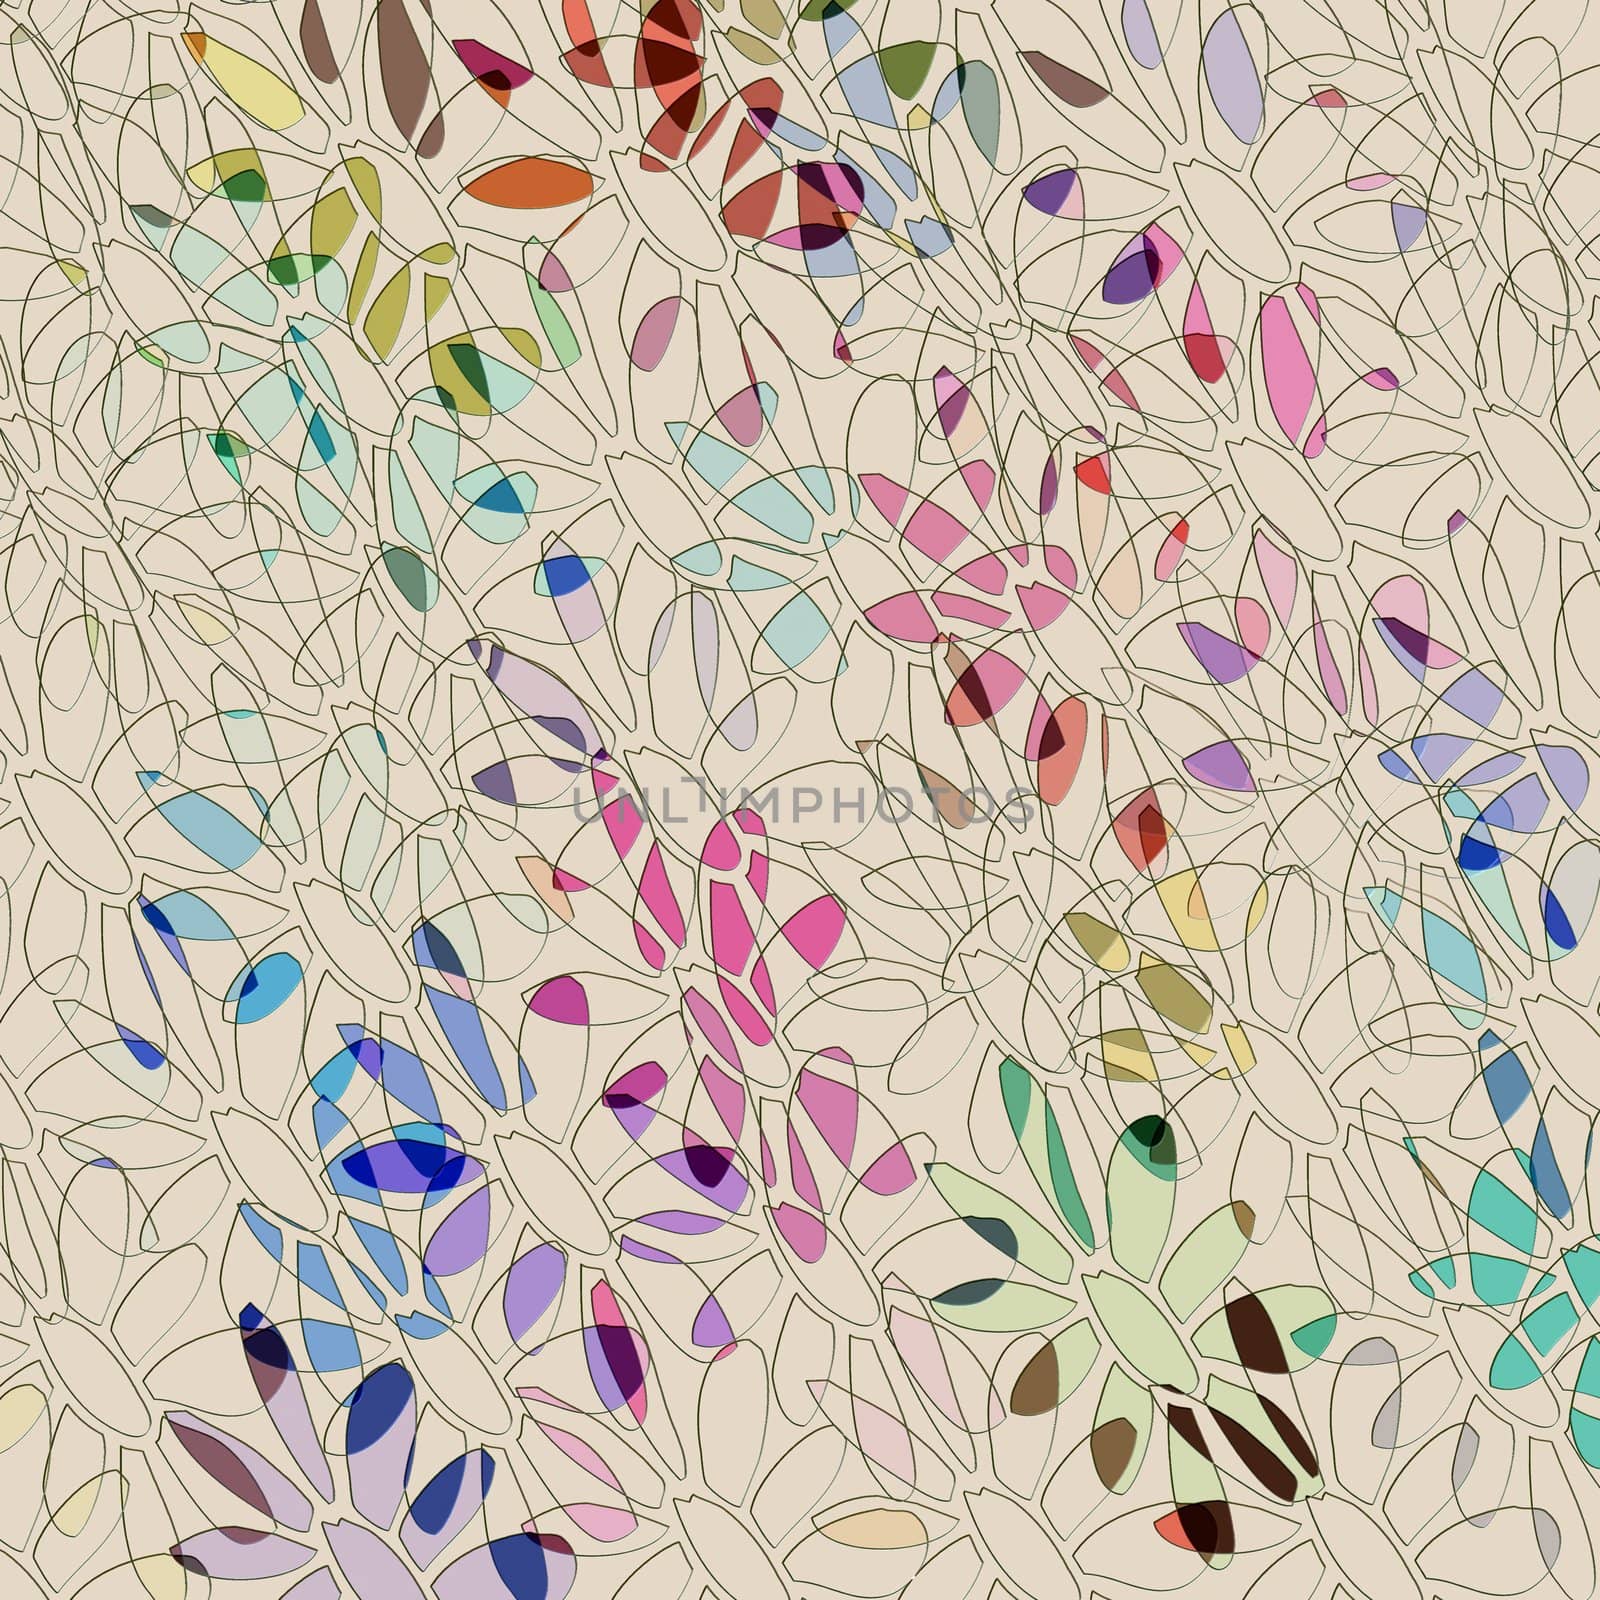 sketched flower shapes on beige background with some colors